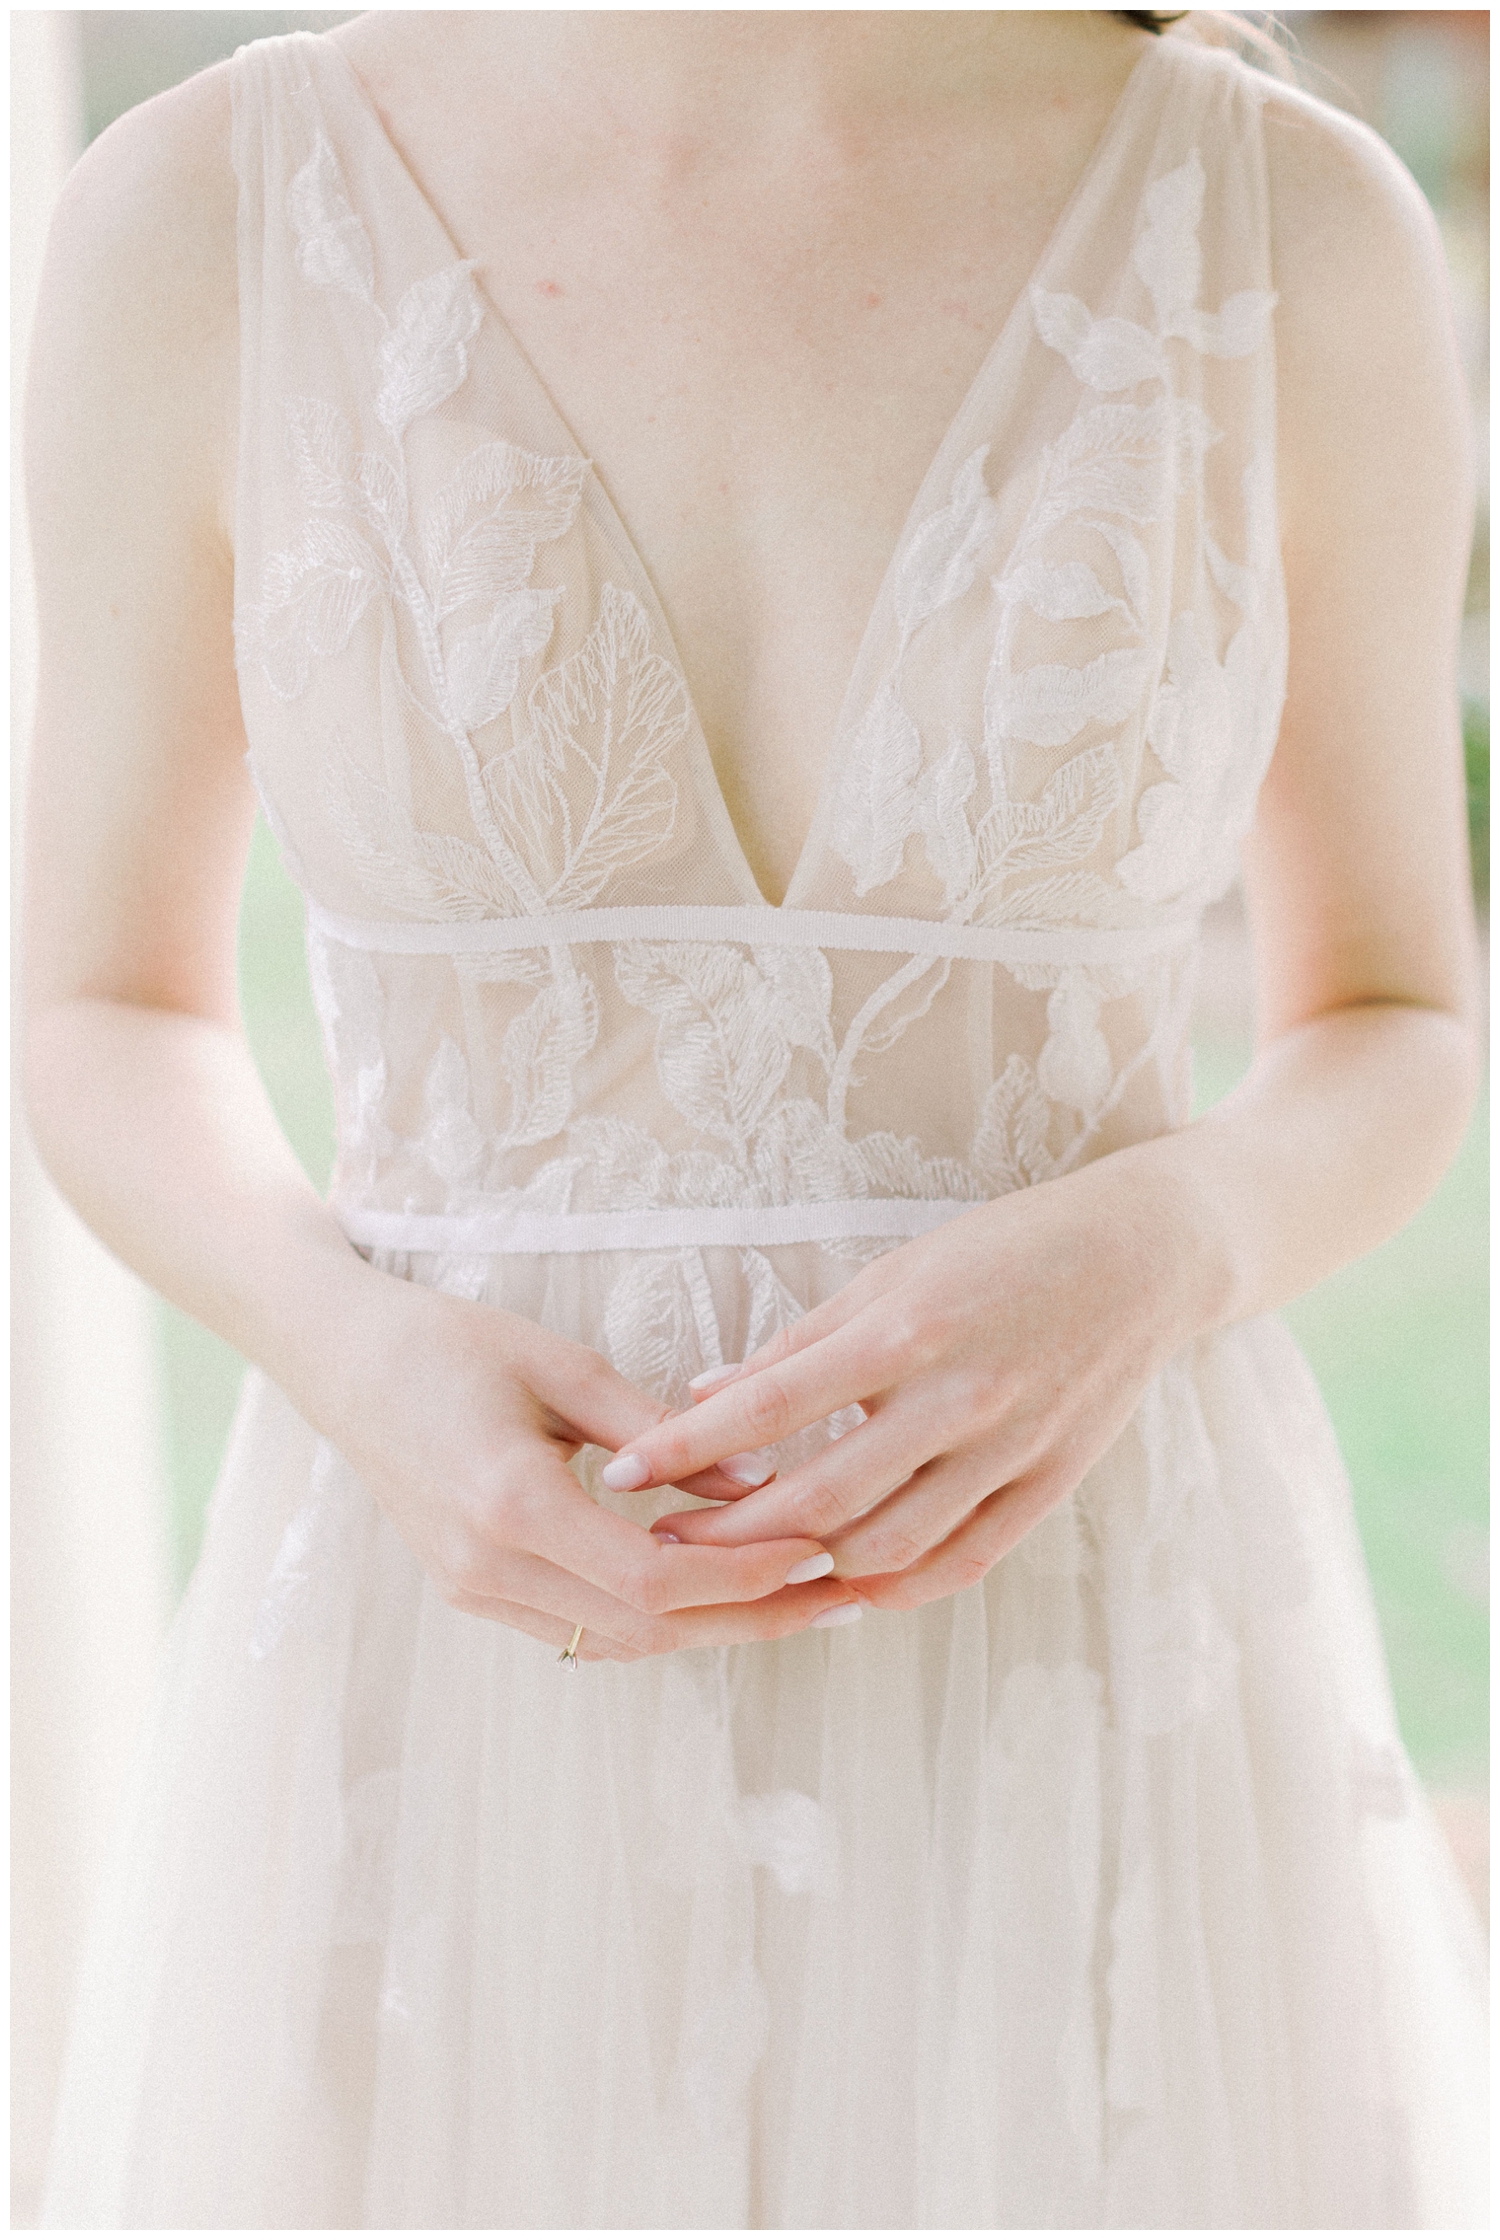 detail shot of bride's hands clasped in front of her waist